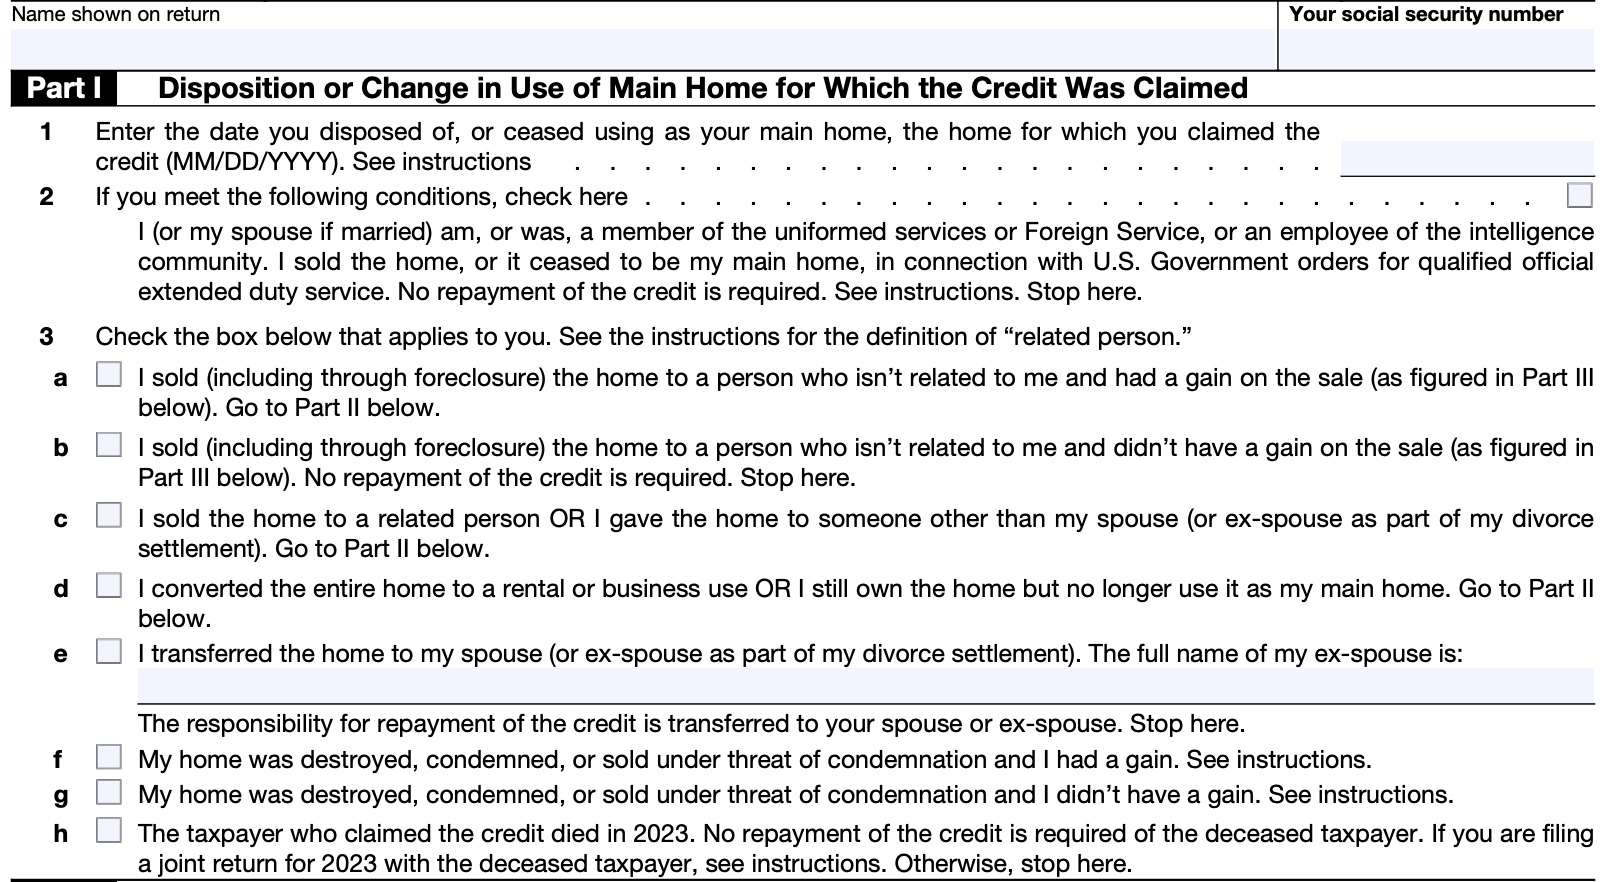 irs form 5405 part i: disposition or change in use of main home for which the credit was claimed